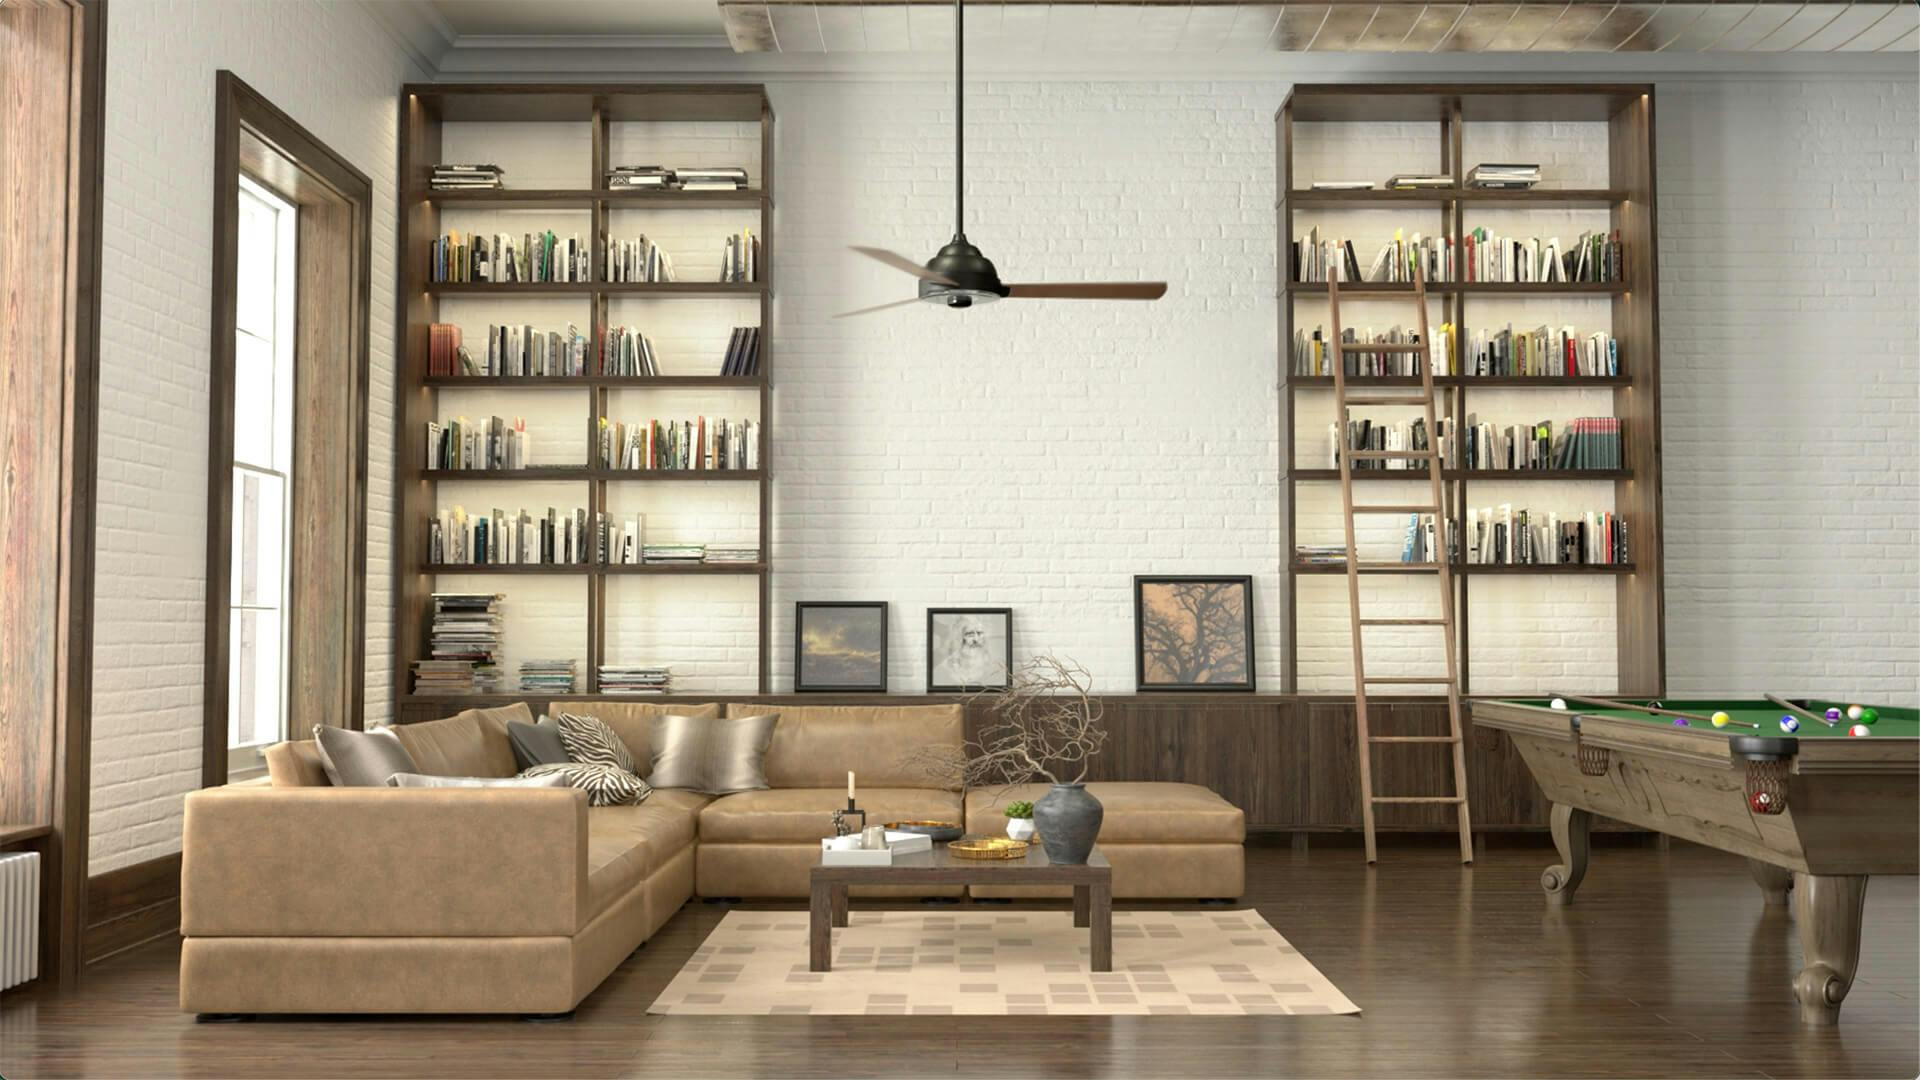 Living room with tall ceilings and floor to ceiling bookshelves featuring a Pinion ceiling fan in black finish